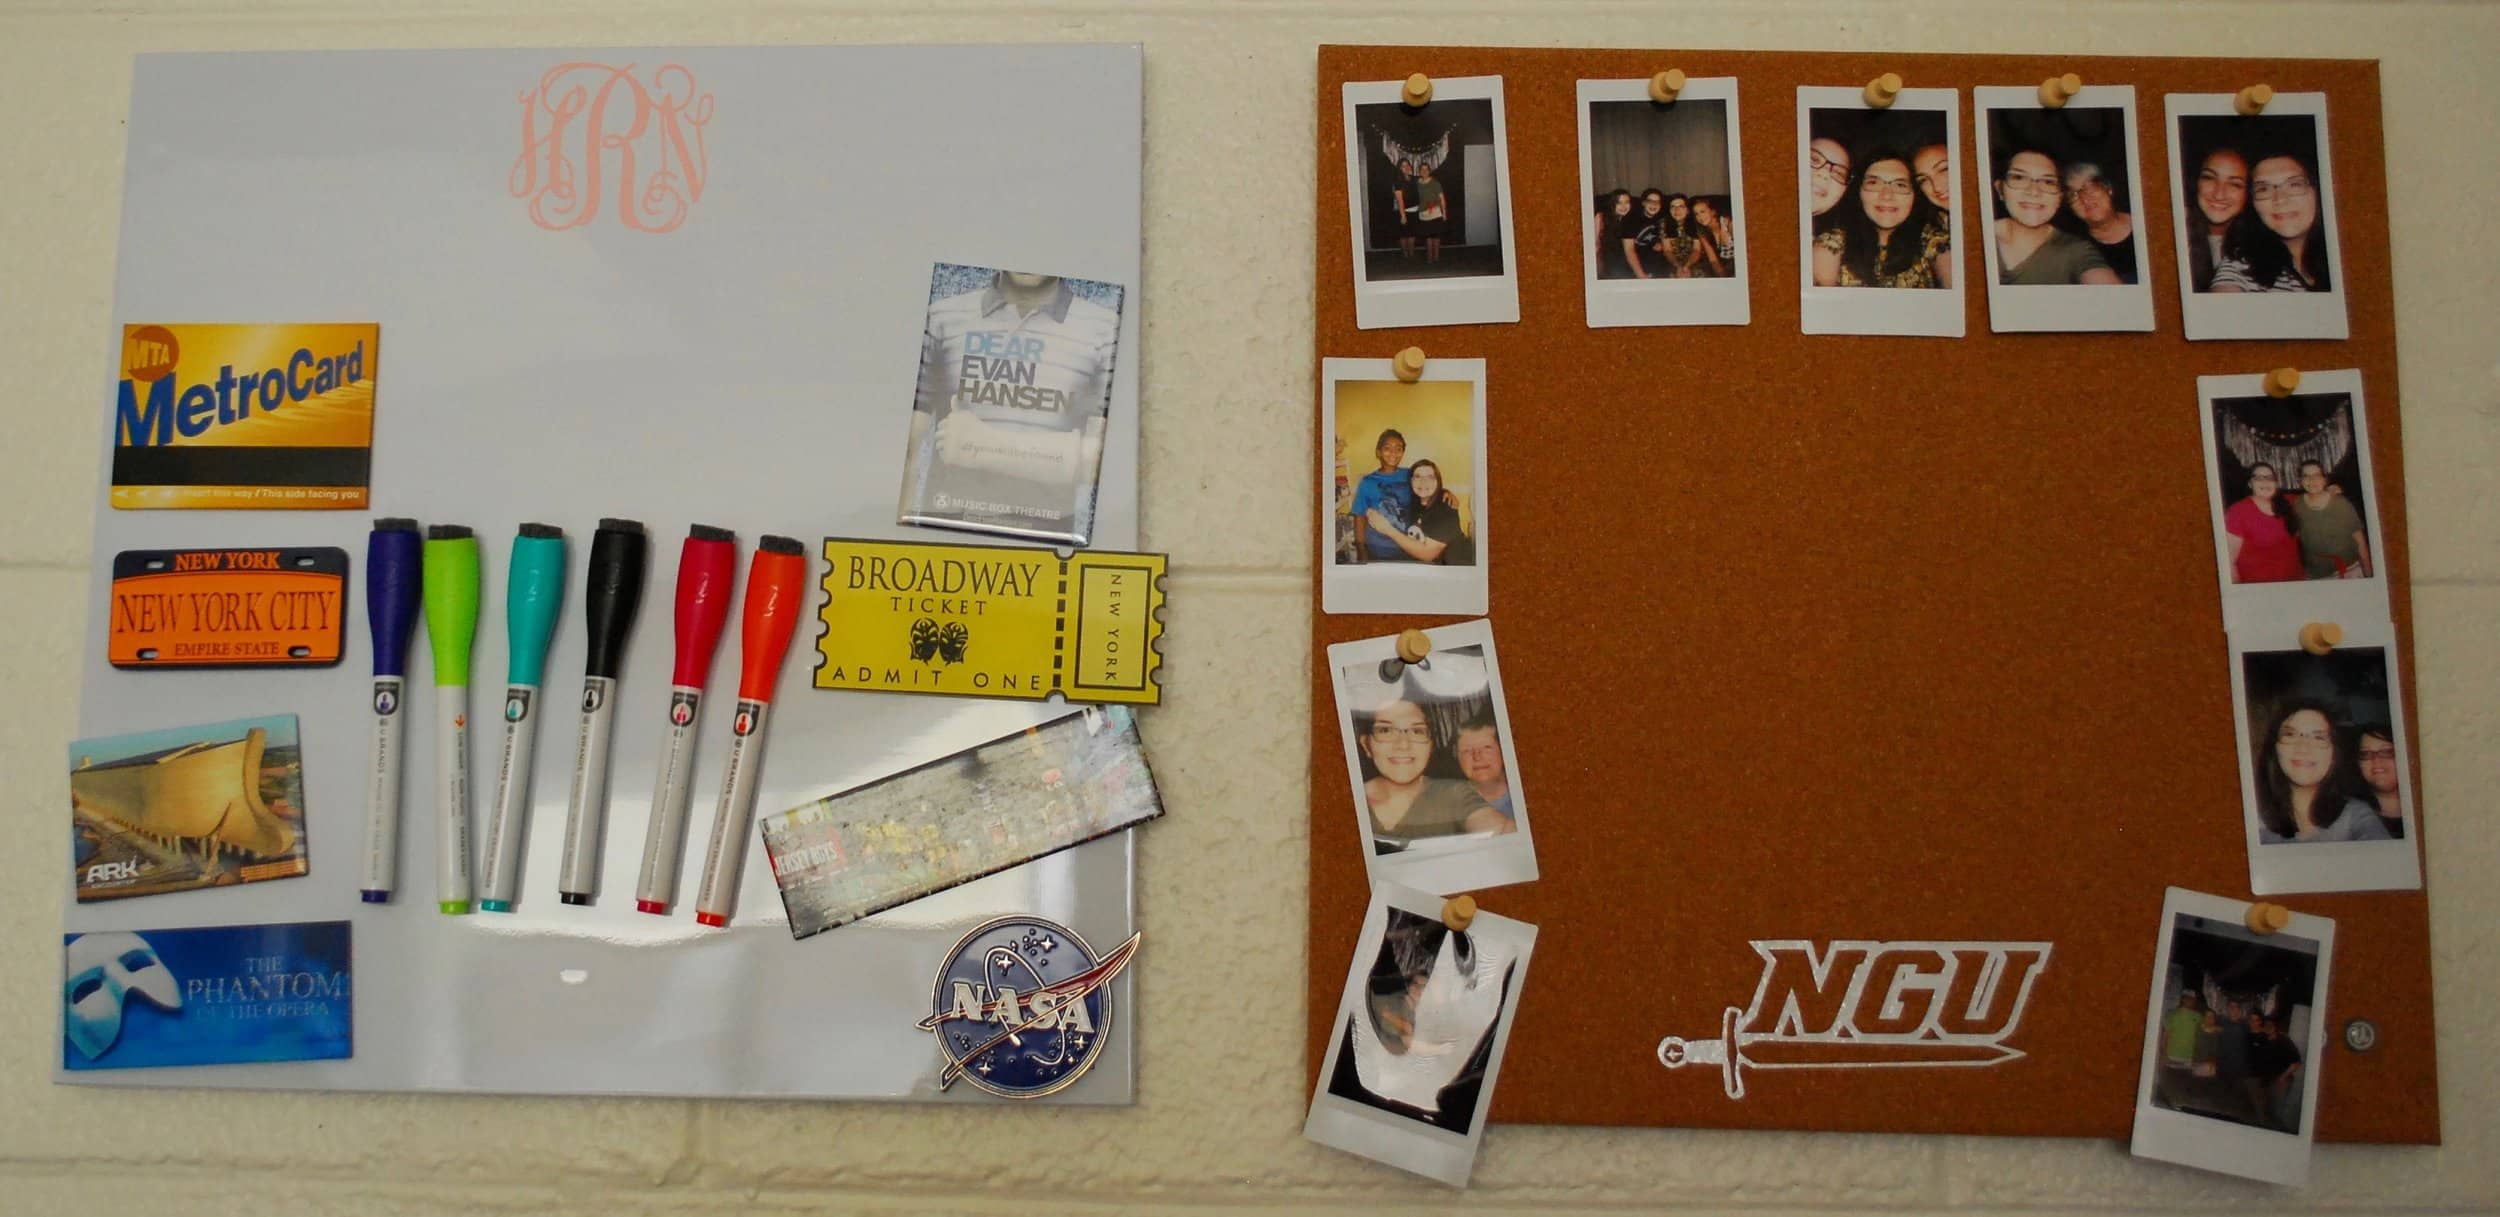 Roddy's collection of New York magnets (left) and one of her many photographic displays of family and friends (right).